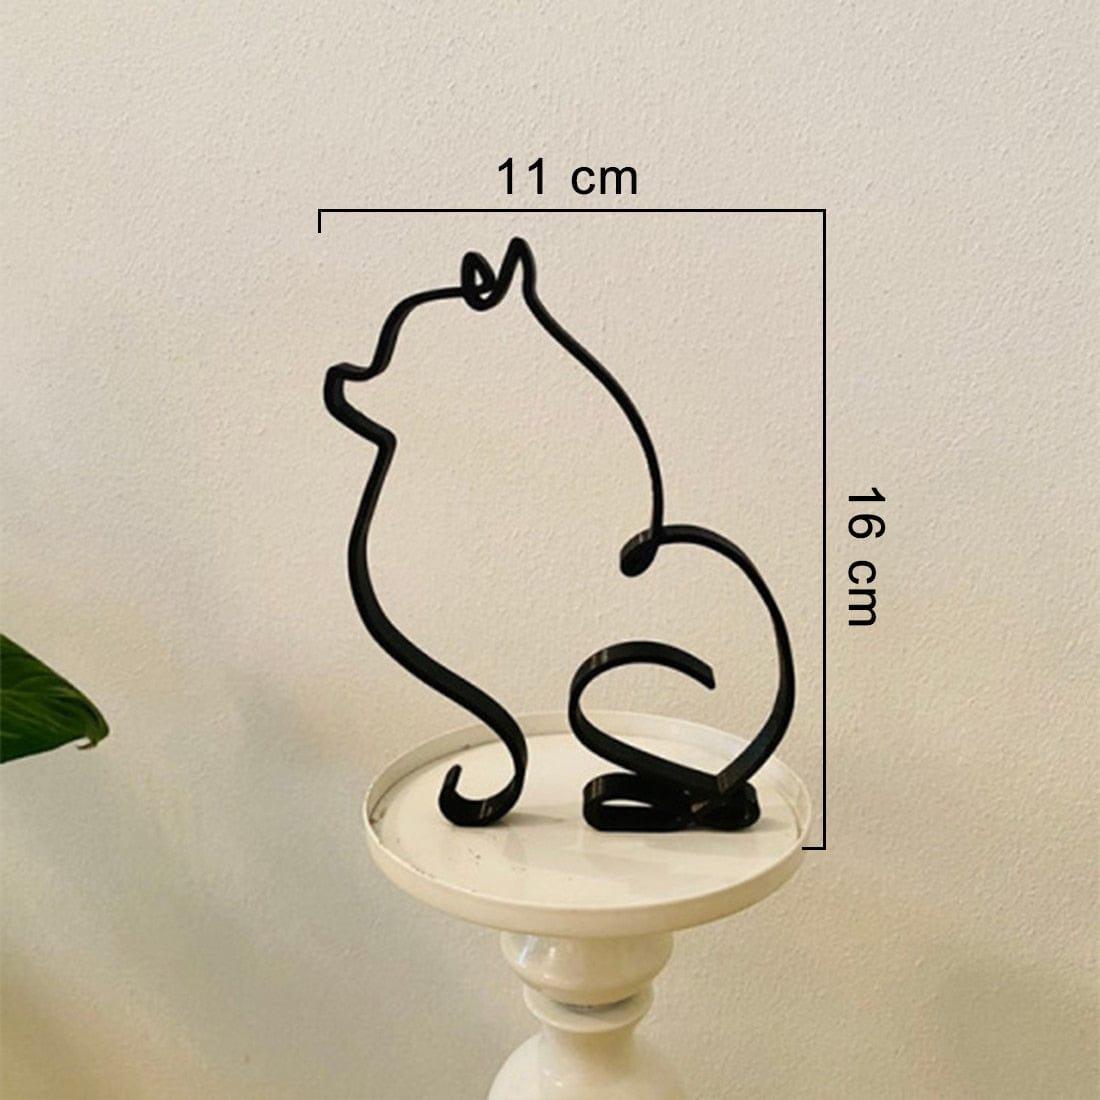 Shop 0 F Dog Art Sculpture Simple Metal Dog Abstract Art Sculpture for Home Party Office Desktop Decoration Cute Pet Dog Cats Gifts Mademoiselle Home Decor